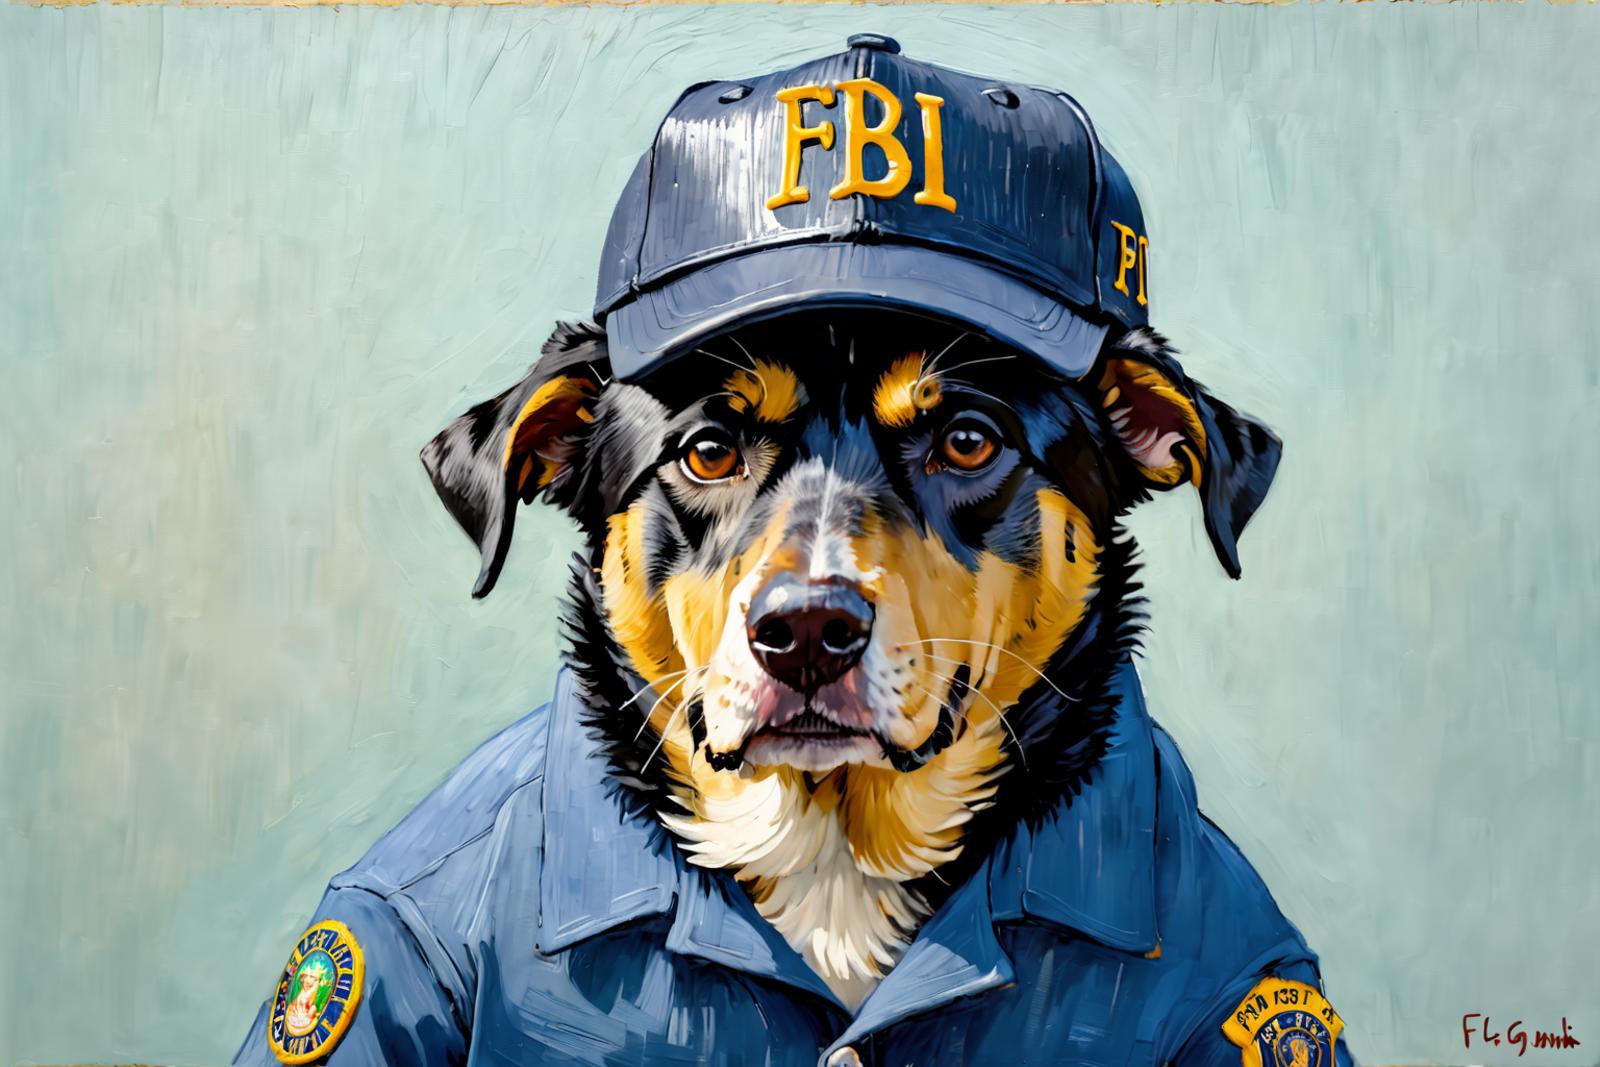 A dog wearing a FBI hat and jacket posing for a portrait.